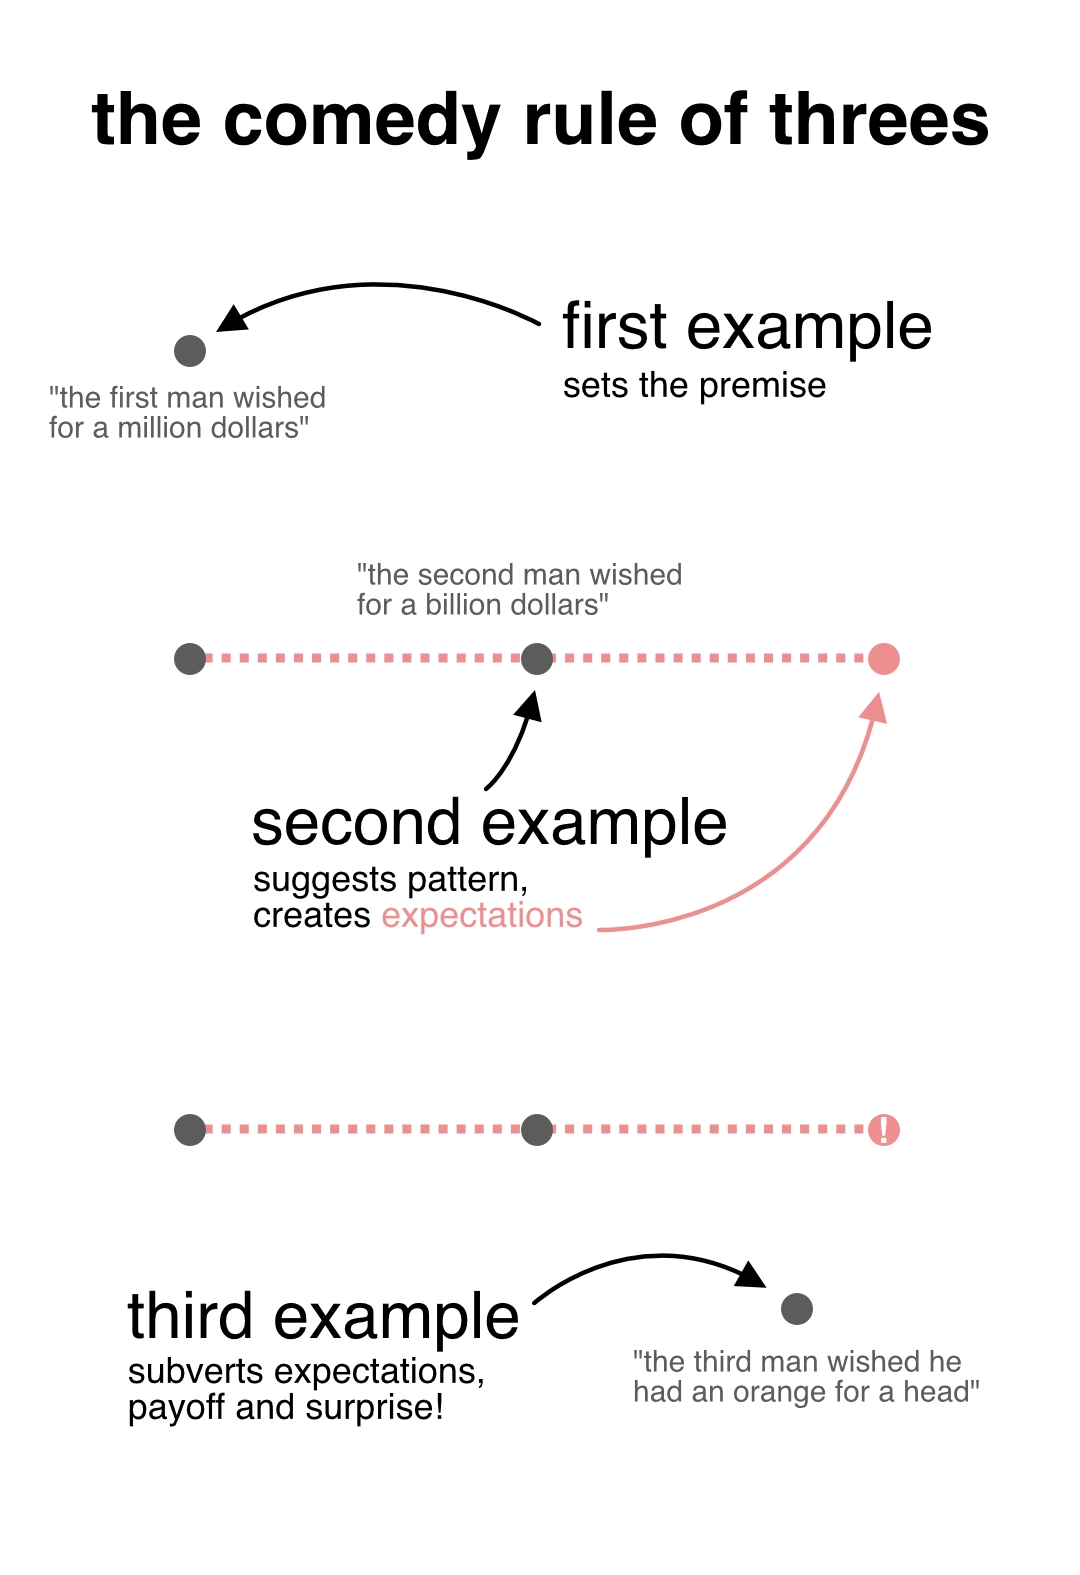 a graphic outlining the geometric necessicity of three examples in order to create expectations. the first example sets the premise, the second example creates a direction for the audience's expectations to take, and the third example subverts those expectations by not being in the direction the audience was thinking it would be. the graphic uses a paraphrased conflation of two of my favourite jokes to make this point: the orange head man joke and the joke about the men stranded on an island where one man wishes that his head was stuck nodding for the rest of his life.